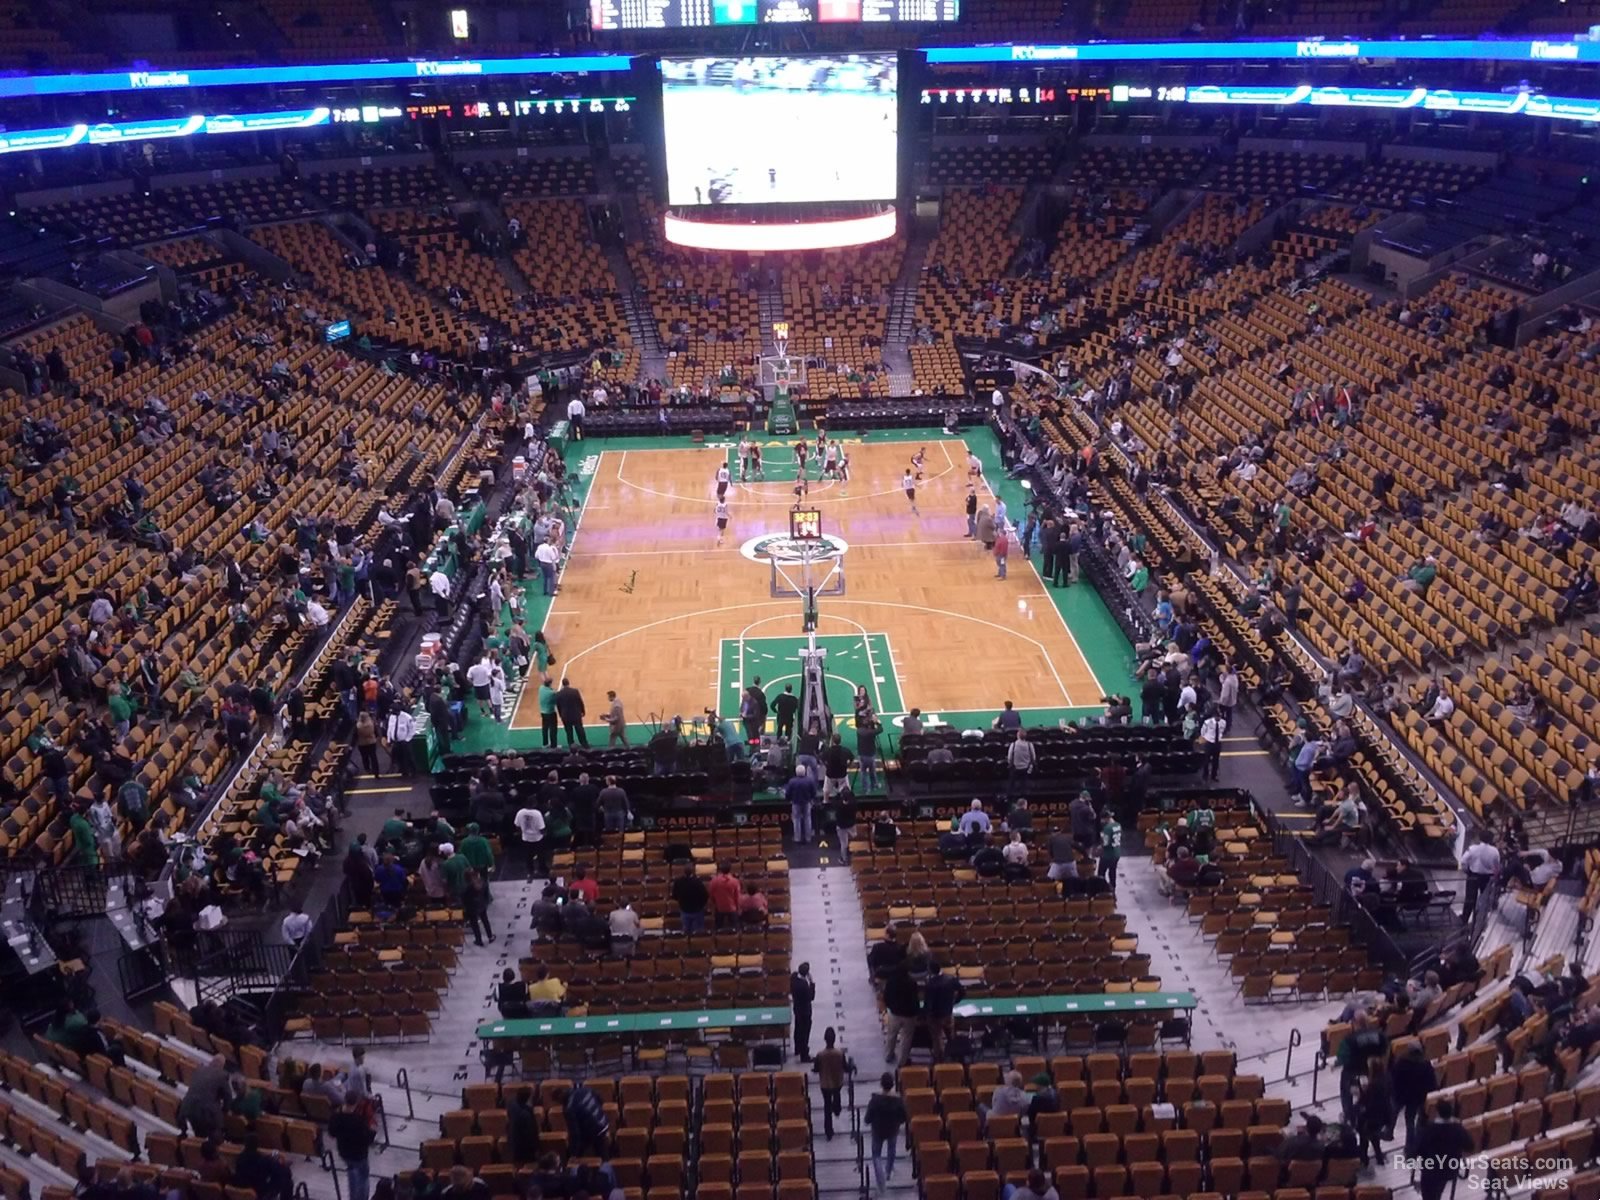 section 324, row 9 seat view  for basketball - td garden